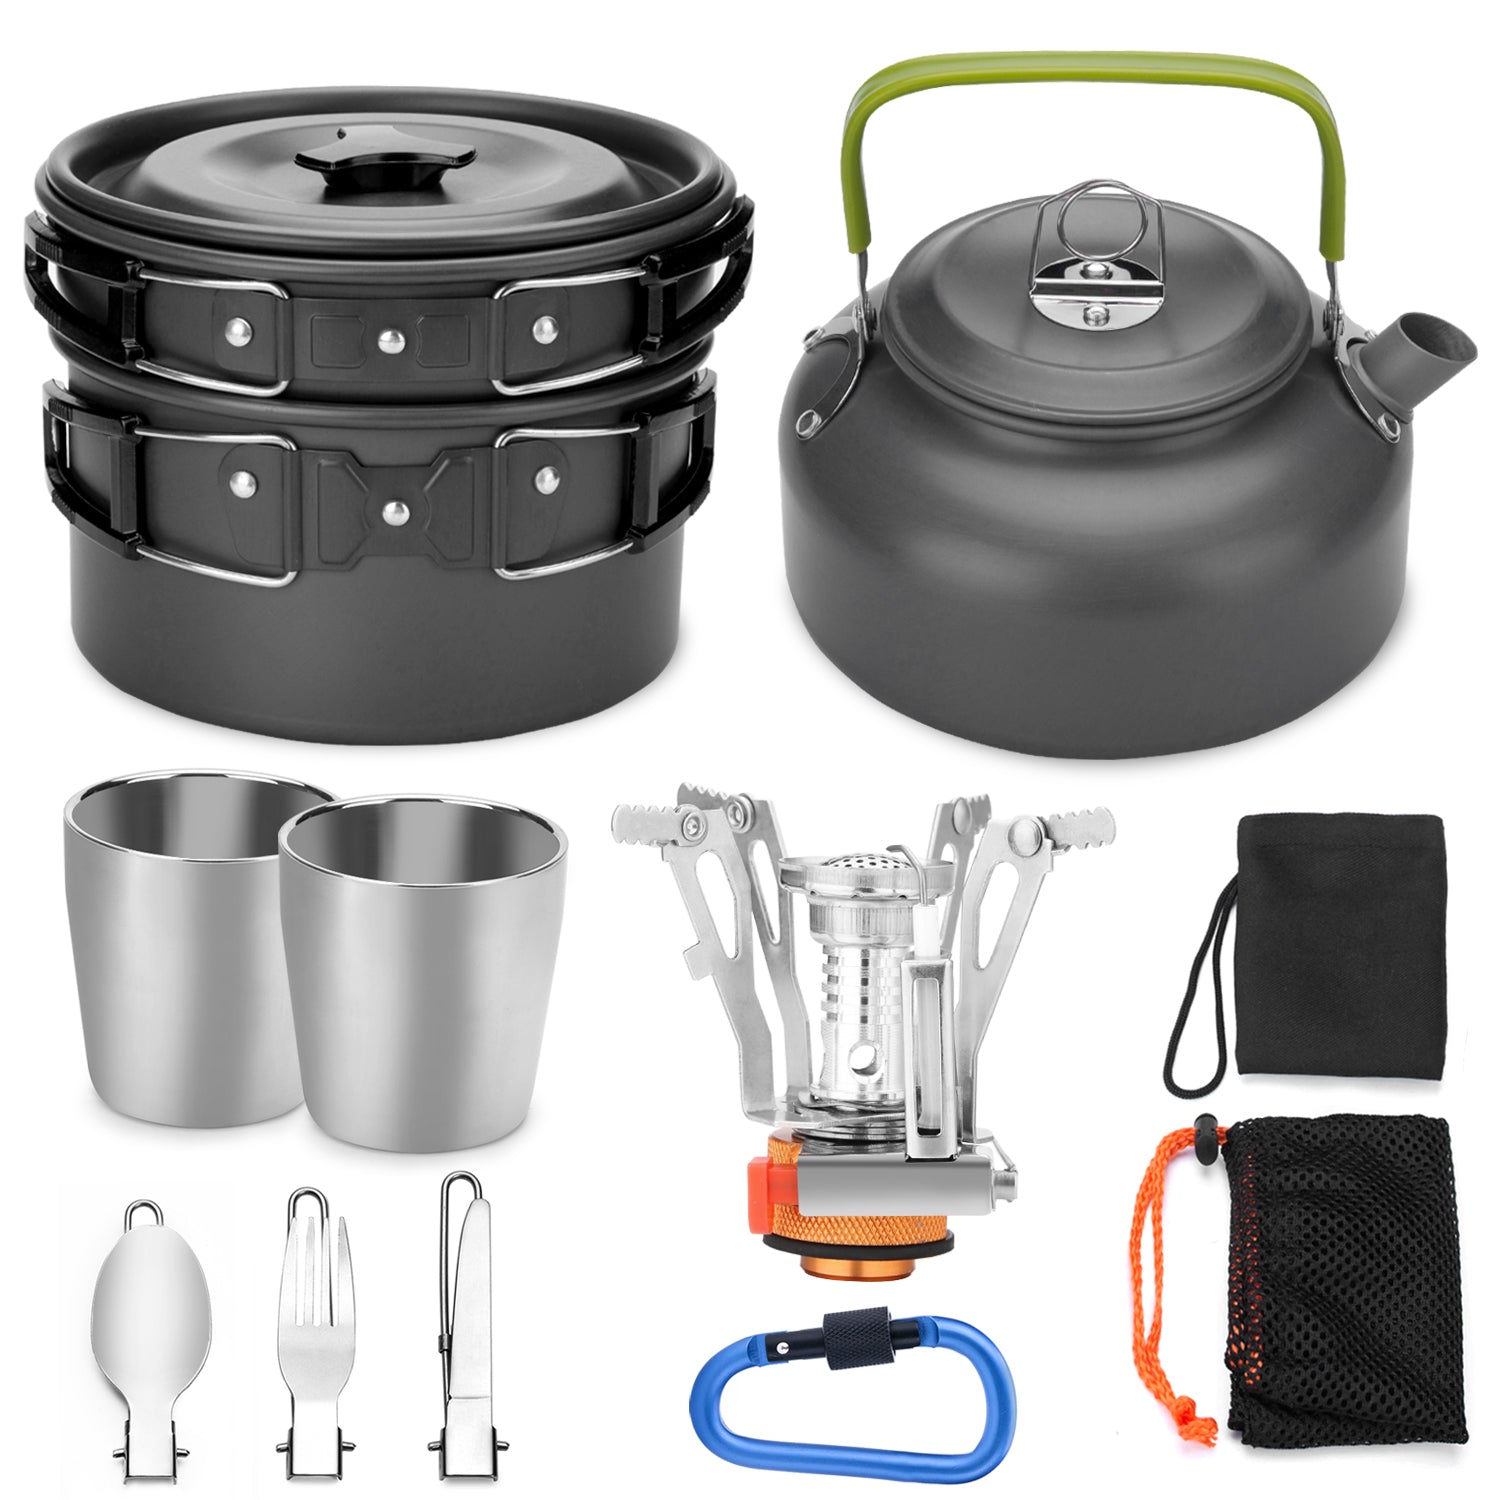 Camping Cookware Set Cooking Mess Kit Nonstick, Lightweight Pots, Pans With  Mesh Set Bag for Backpacking, Hiking, Picnic,Outdoor